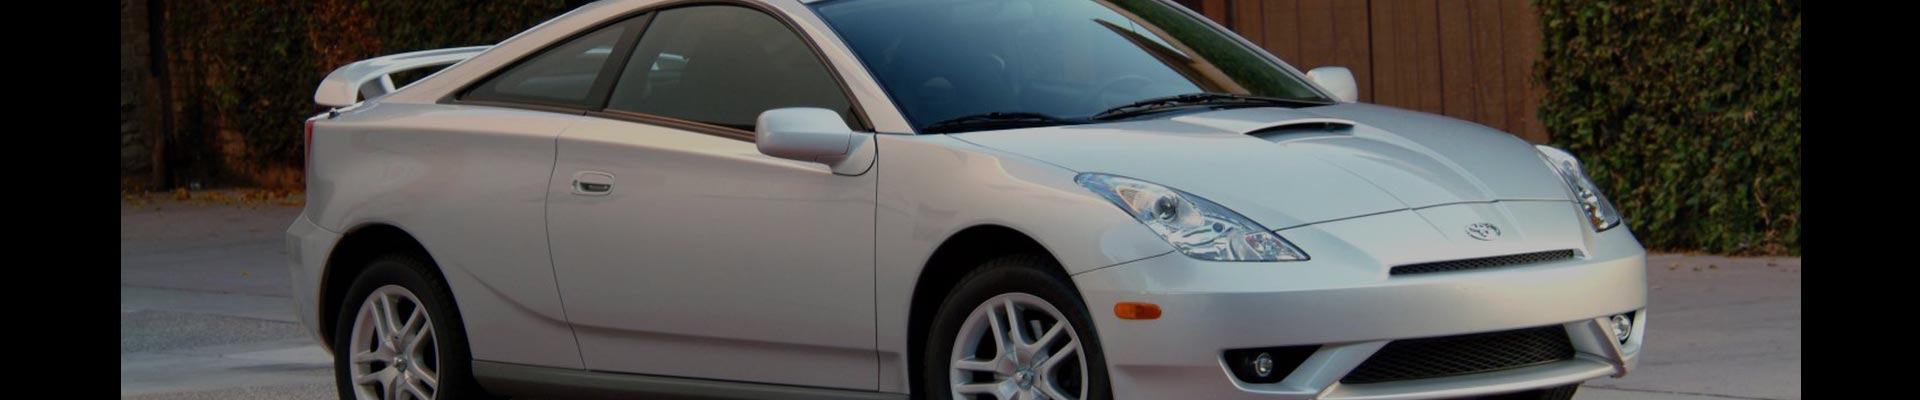 Shop Replacement and OEM 1996 Toyota Celica Parts with Discounted Price on the Net